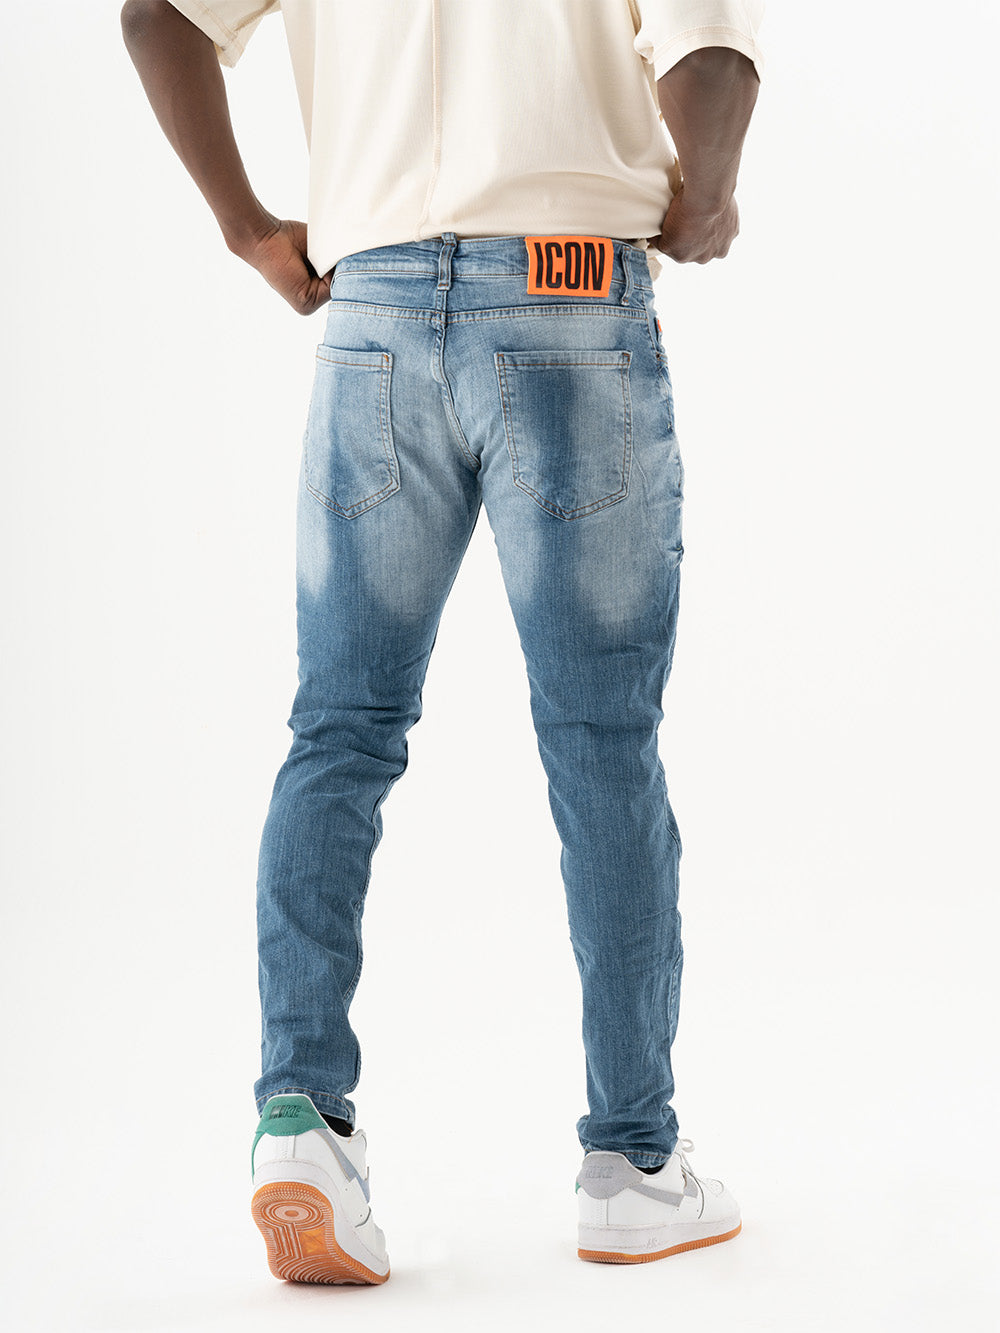 The back of a man wearing TEZAR jeans and a white t-shirt.